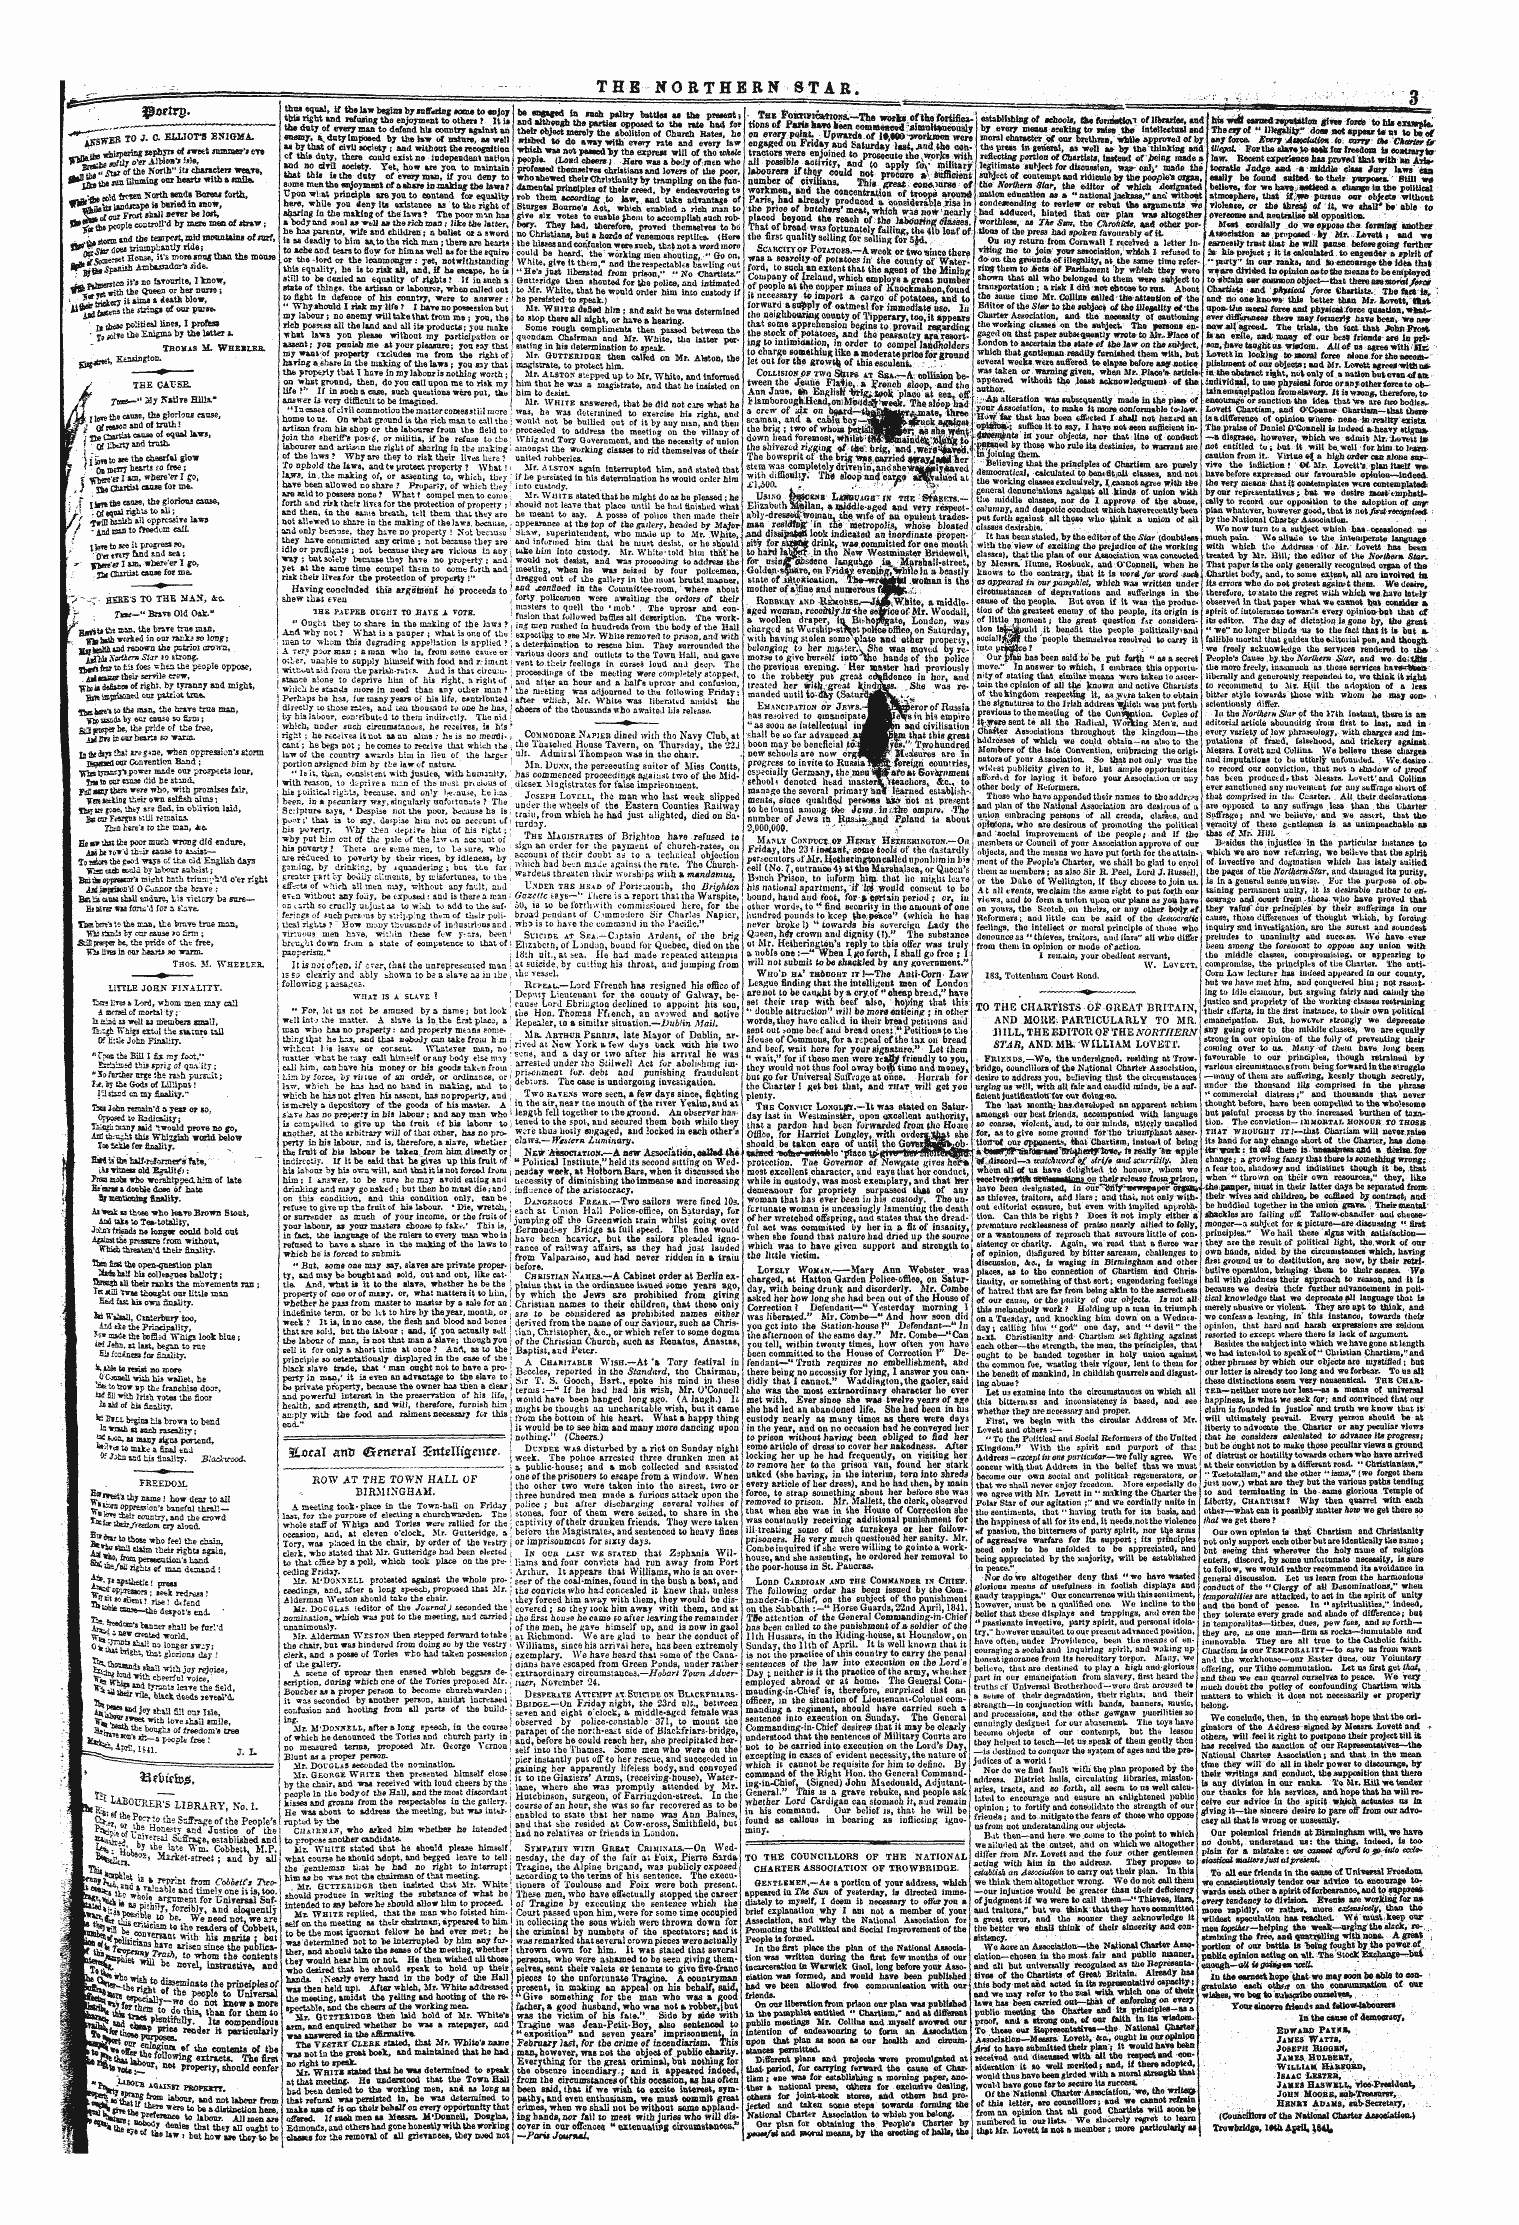 Northern Star (1837-1852): jS F Y, 1st edition - To The Councillors Of The National